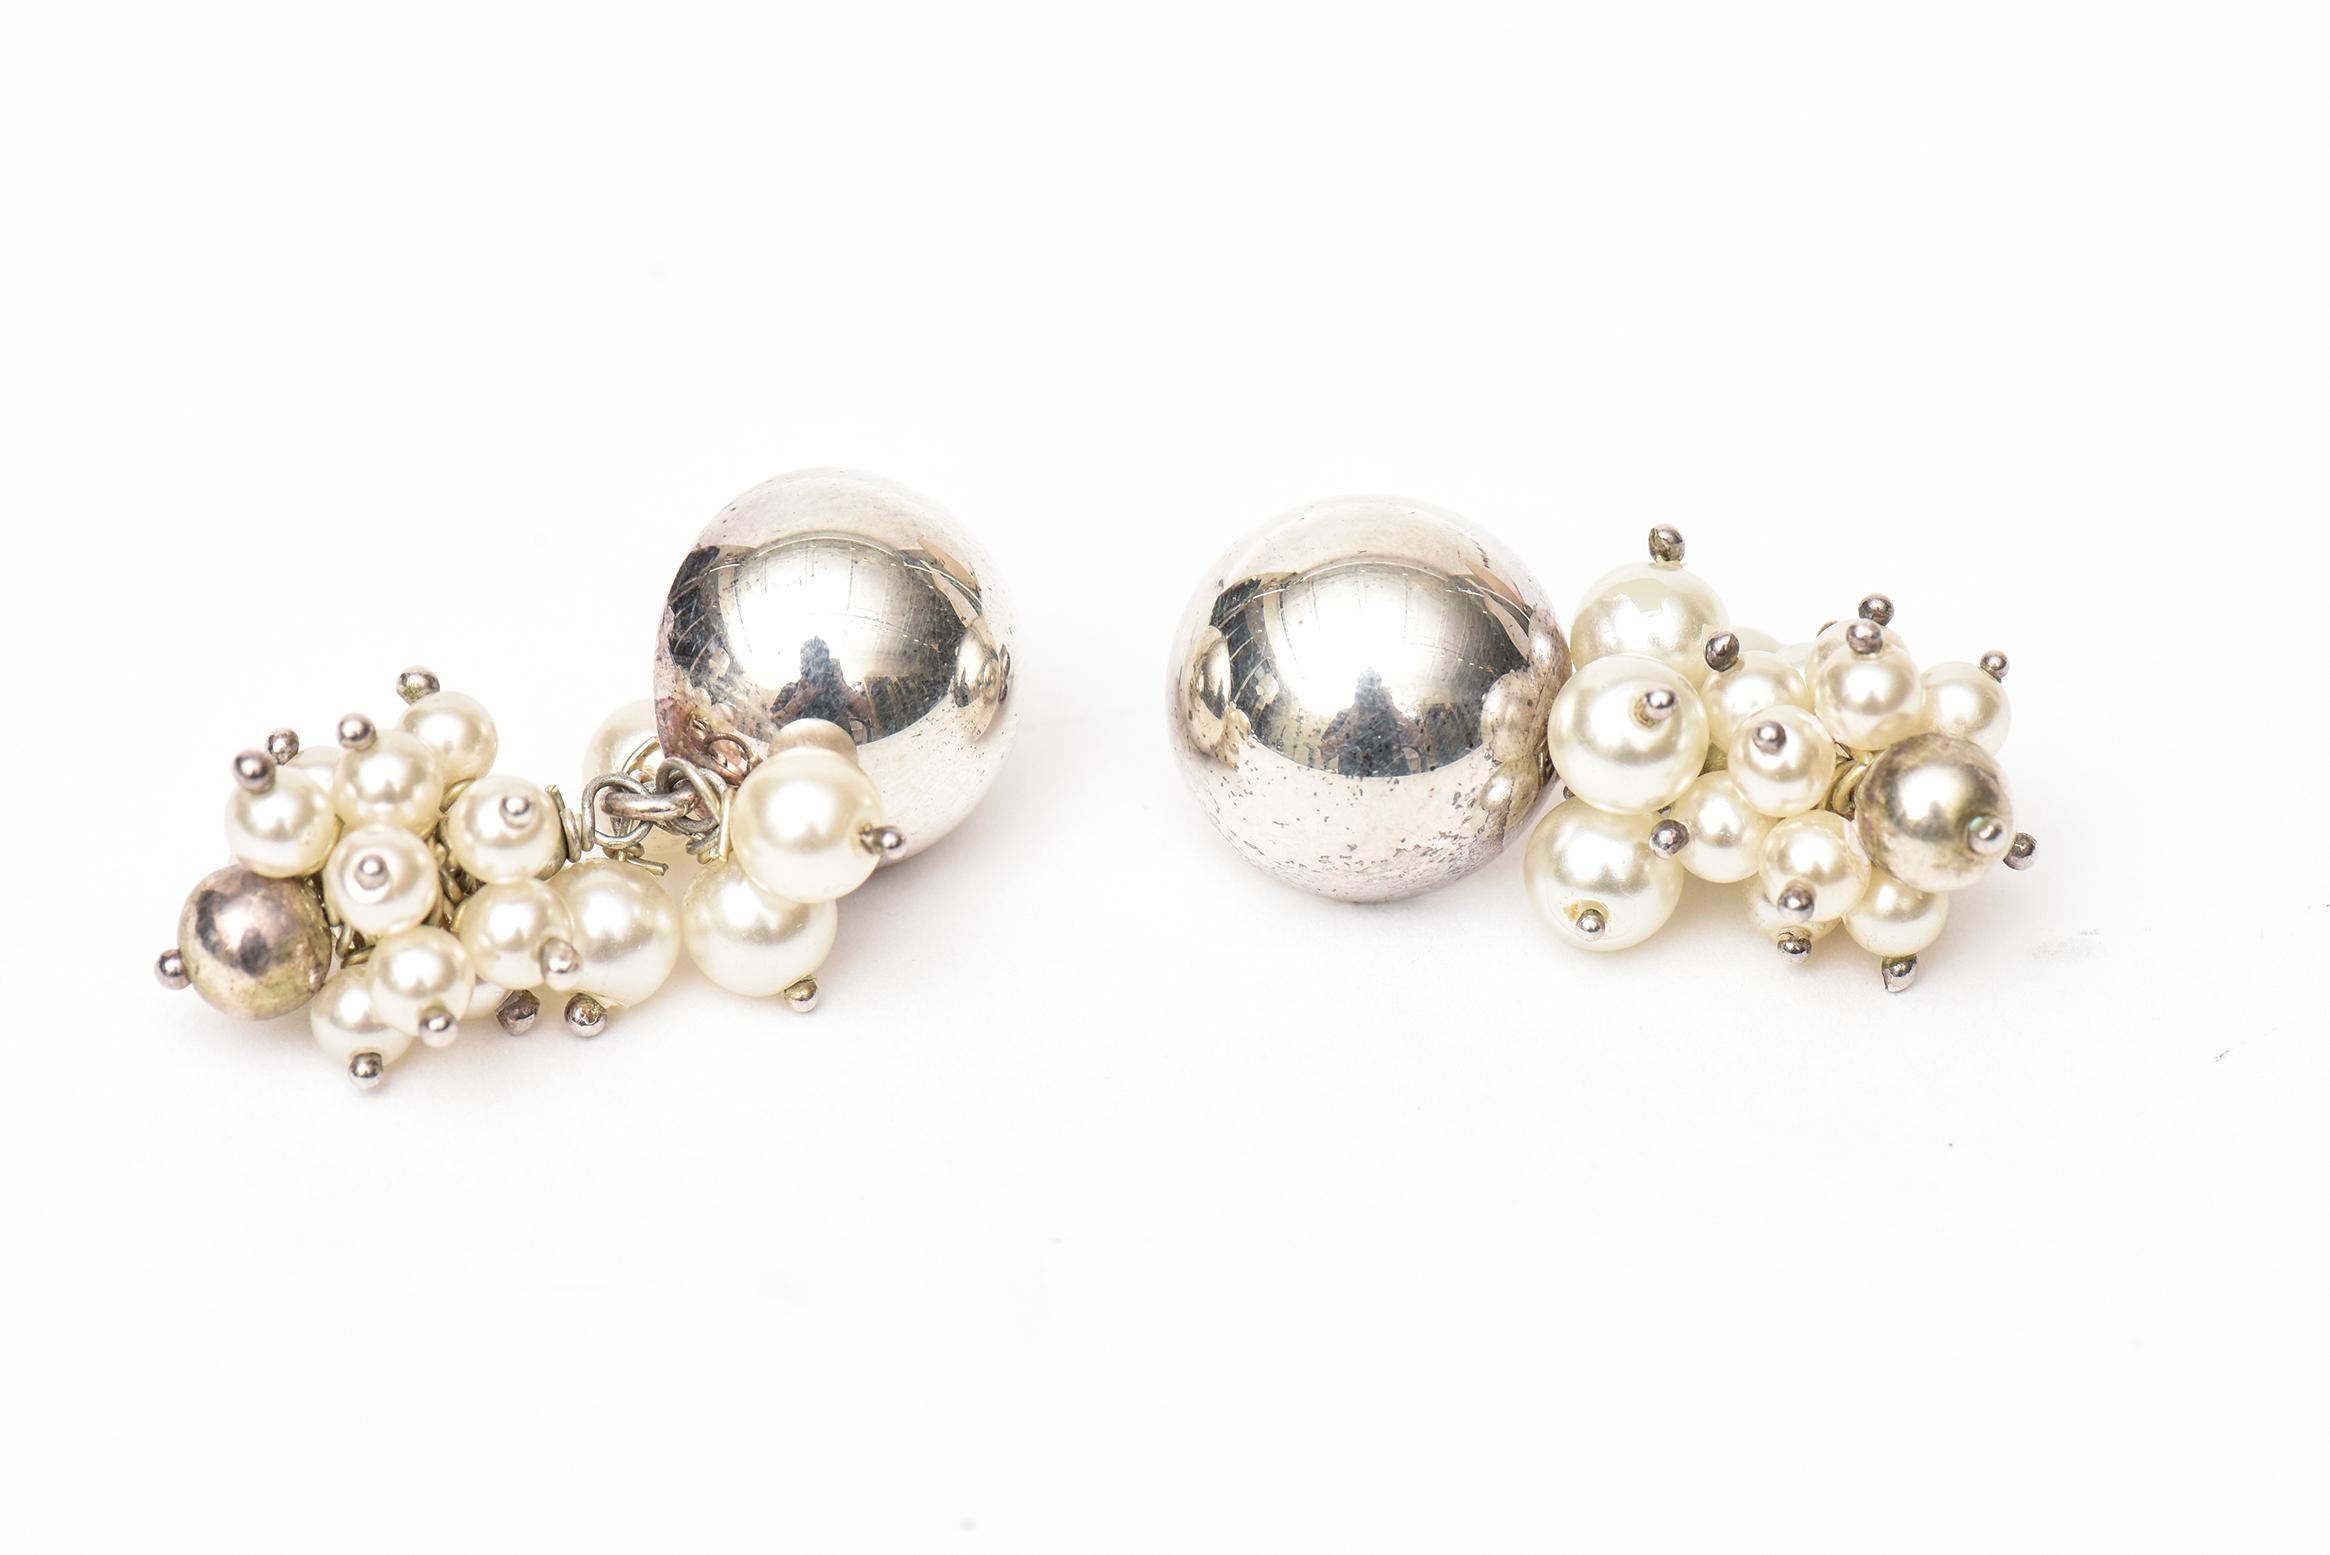 These lovely and elegant cluster dangle pierced sterling silver and pearl earrings are Italian and marked  925 UTC ITALY. The pearls are connected with sterling silver pins. These are forever and can go casual to dressy. All seasons wear. Sorry the